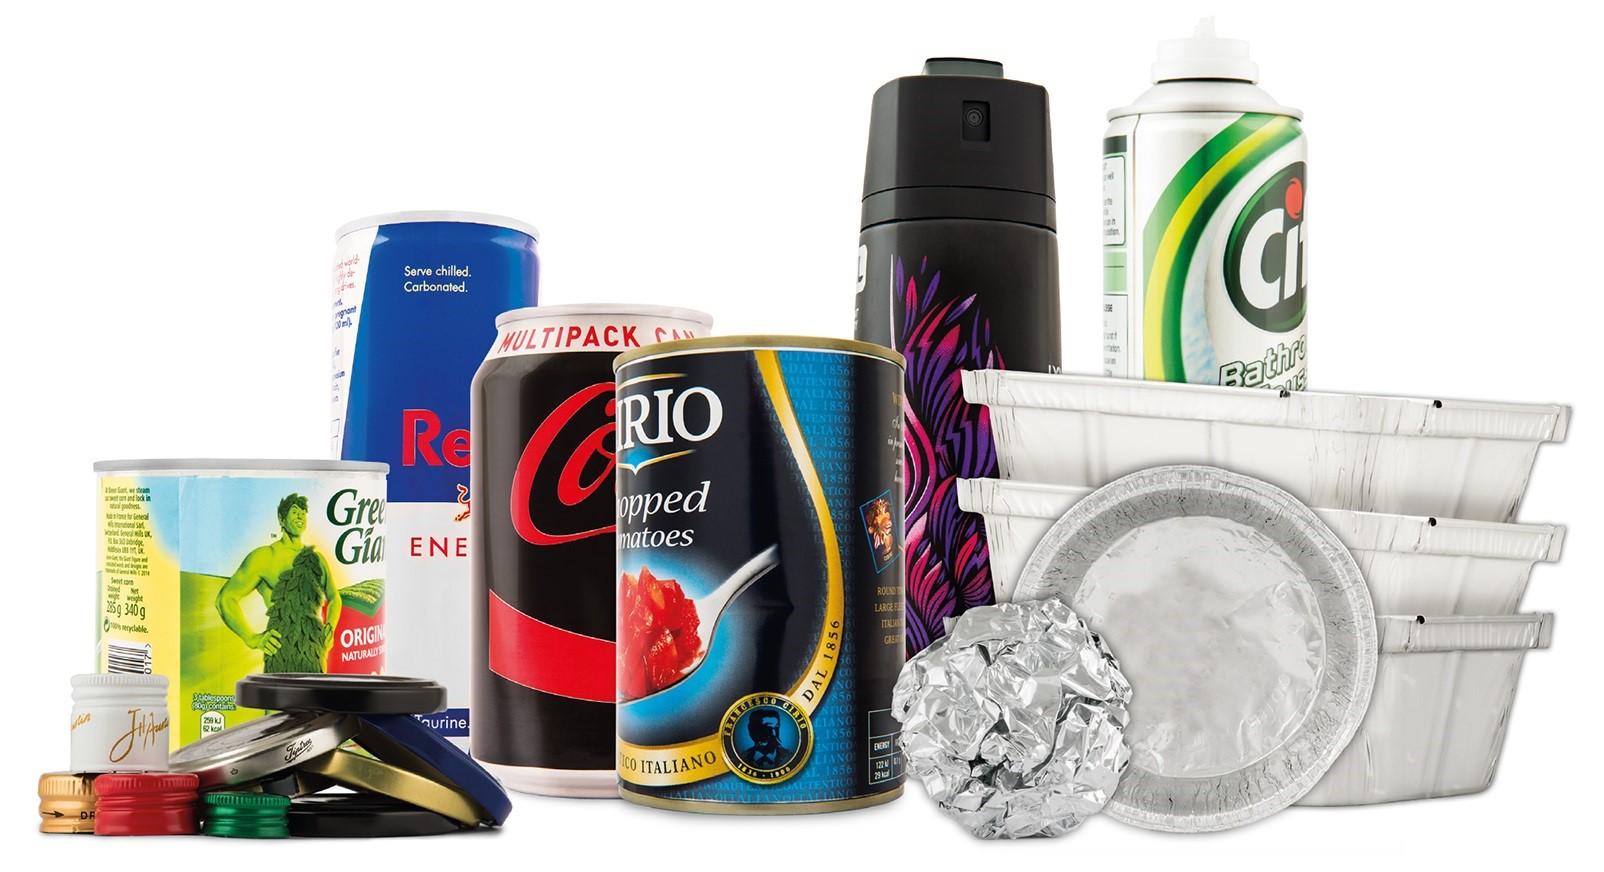 Suffolk Waste Partnership and Alupro roll out a new campaign to enhance aluminium packaging recycling rate